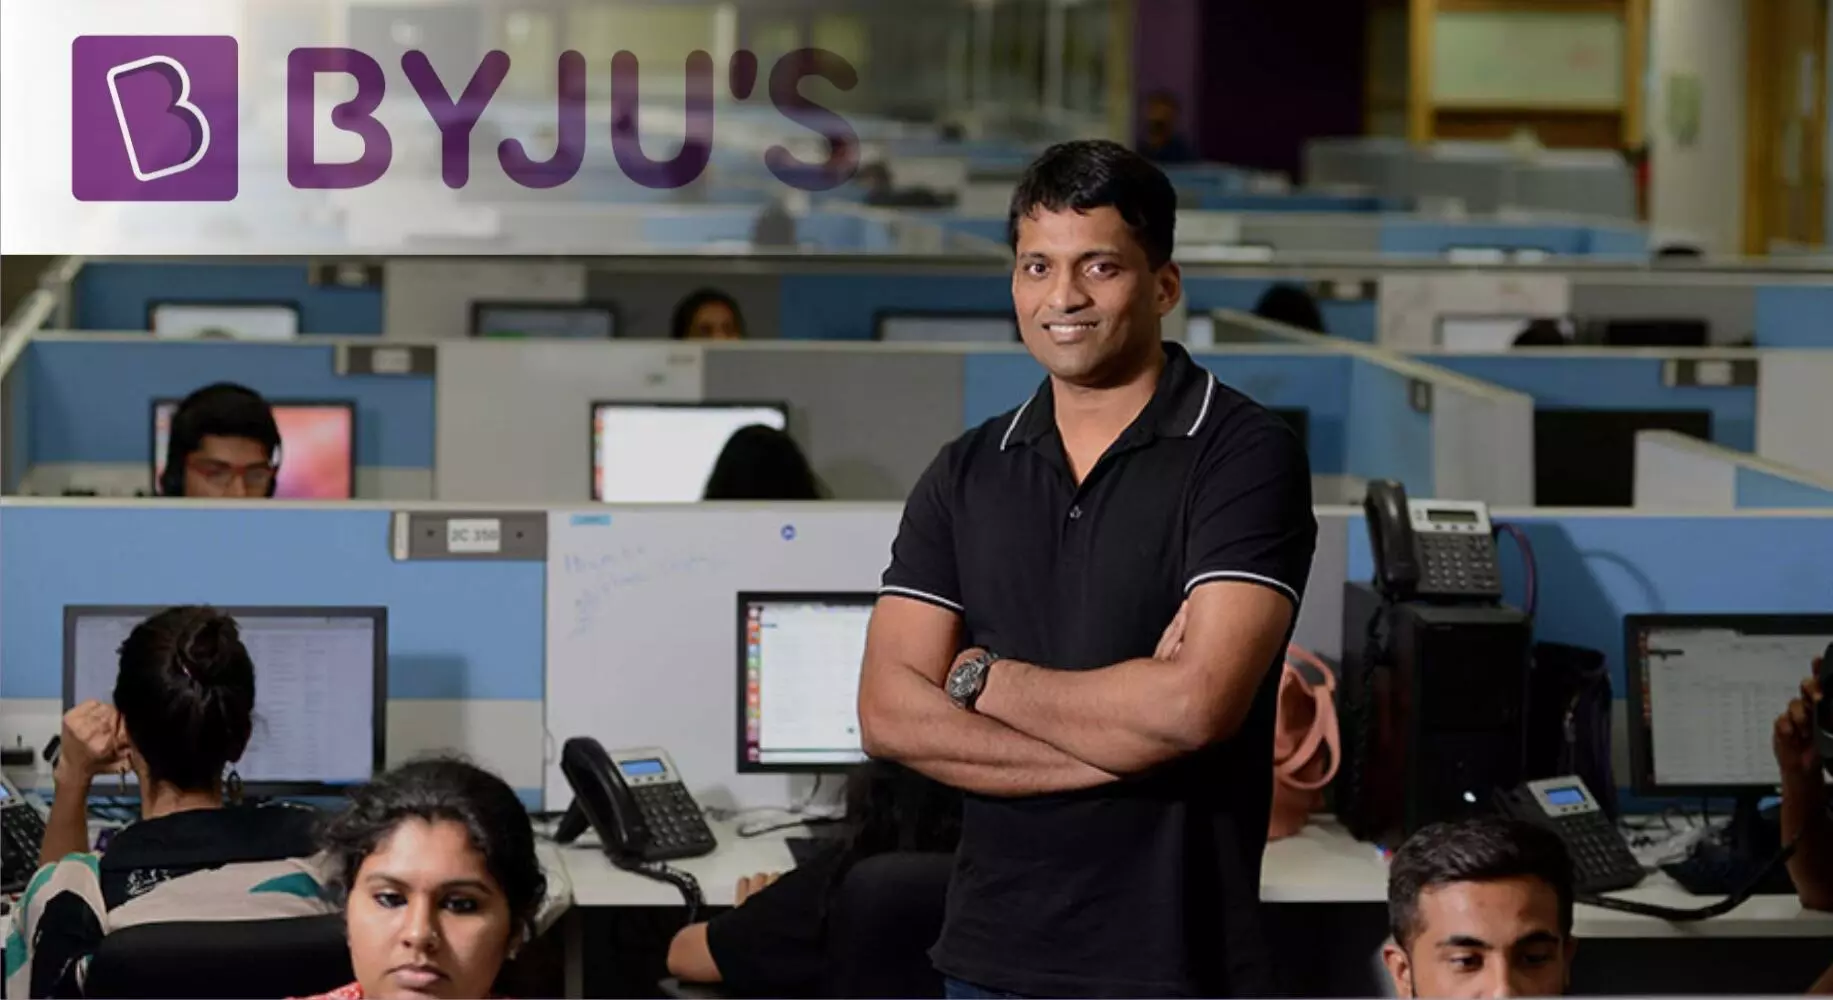 Byjus gives up office spaces across country to cut costs, imposes work from home for staff